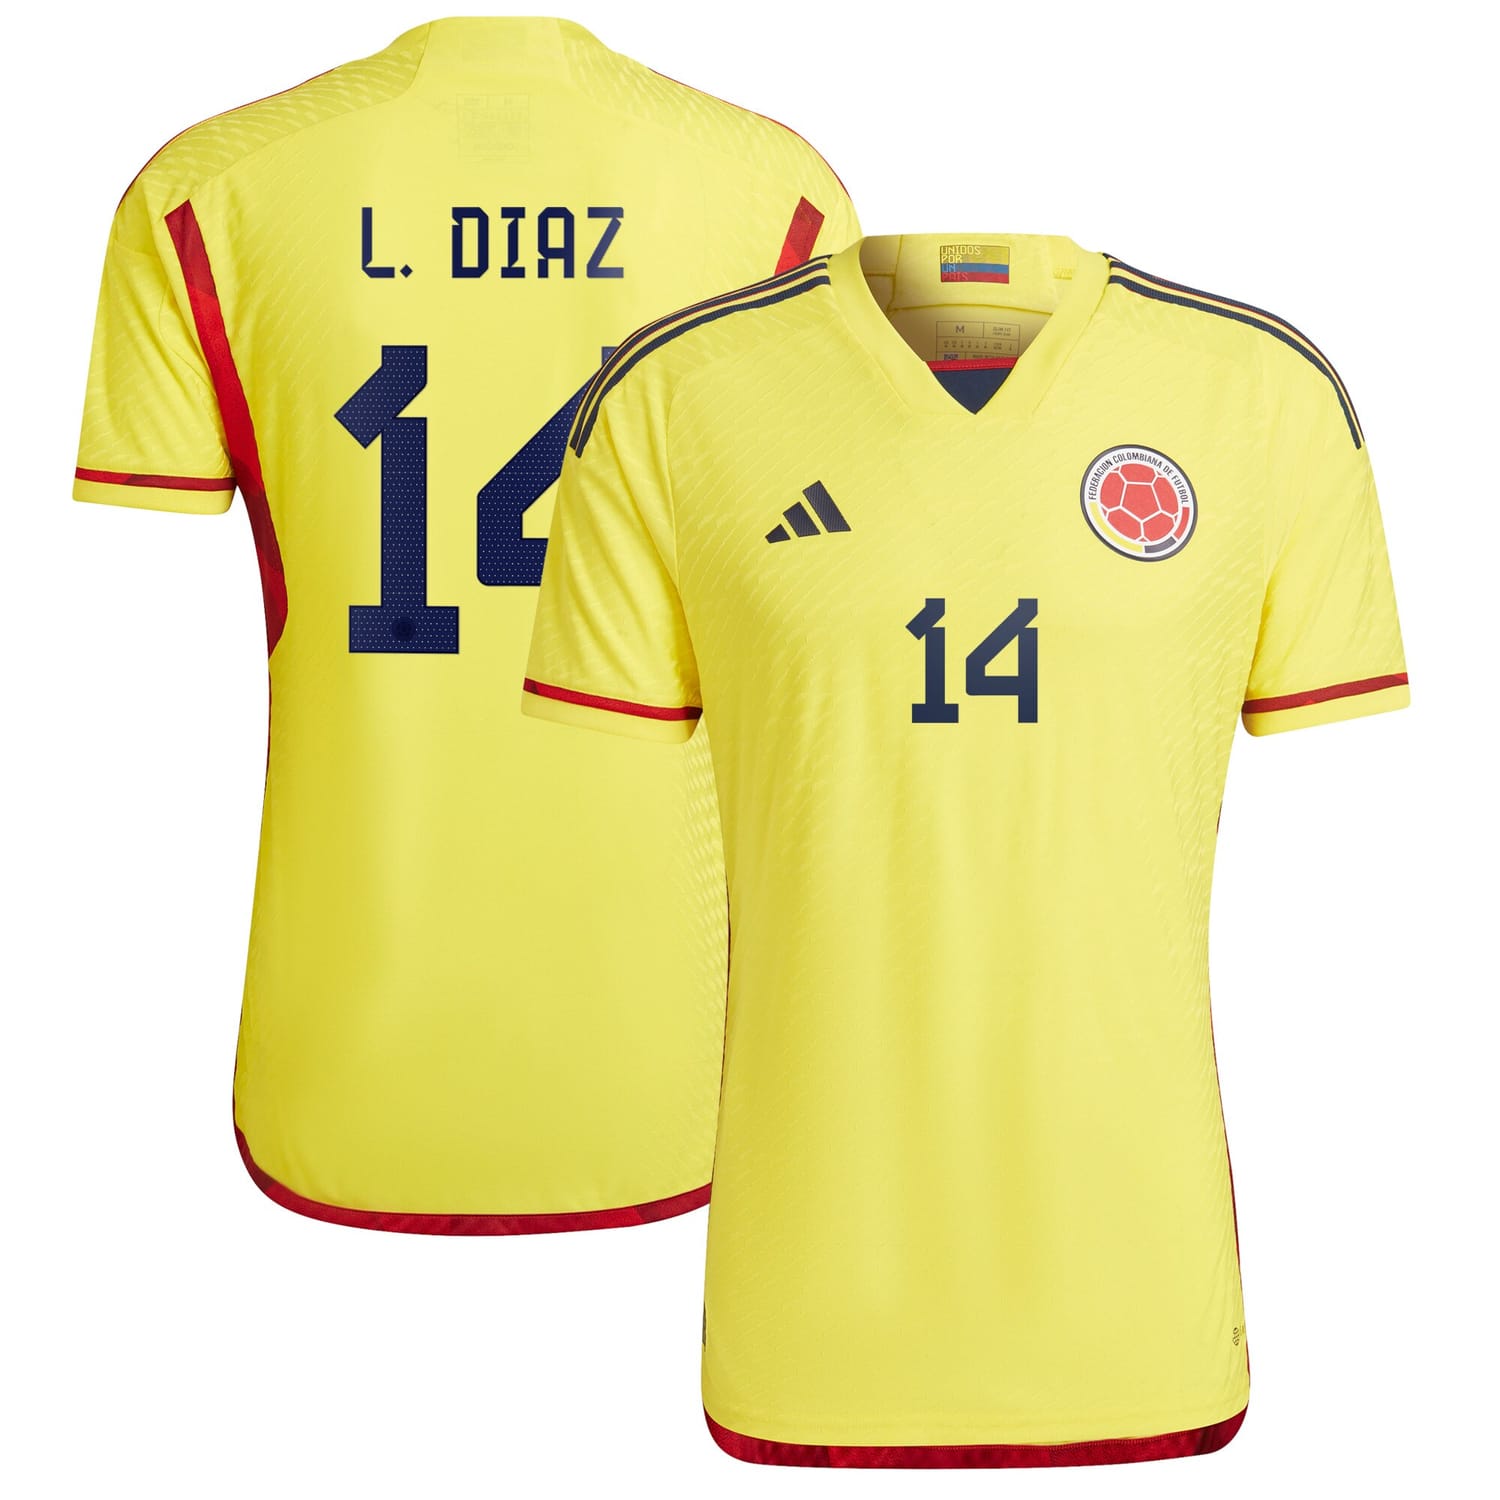 Colombia National Team Home Authentic Jersey Shirt Yellow 2022-23 player Luis Diaz printing for Men